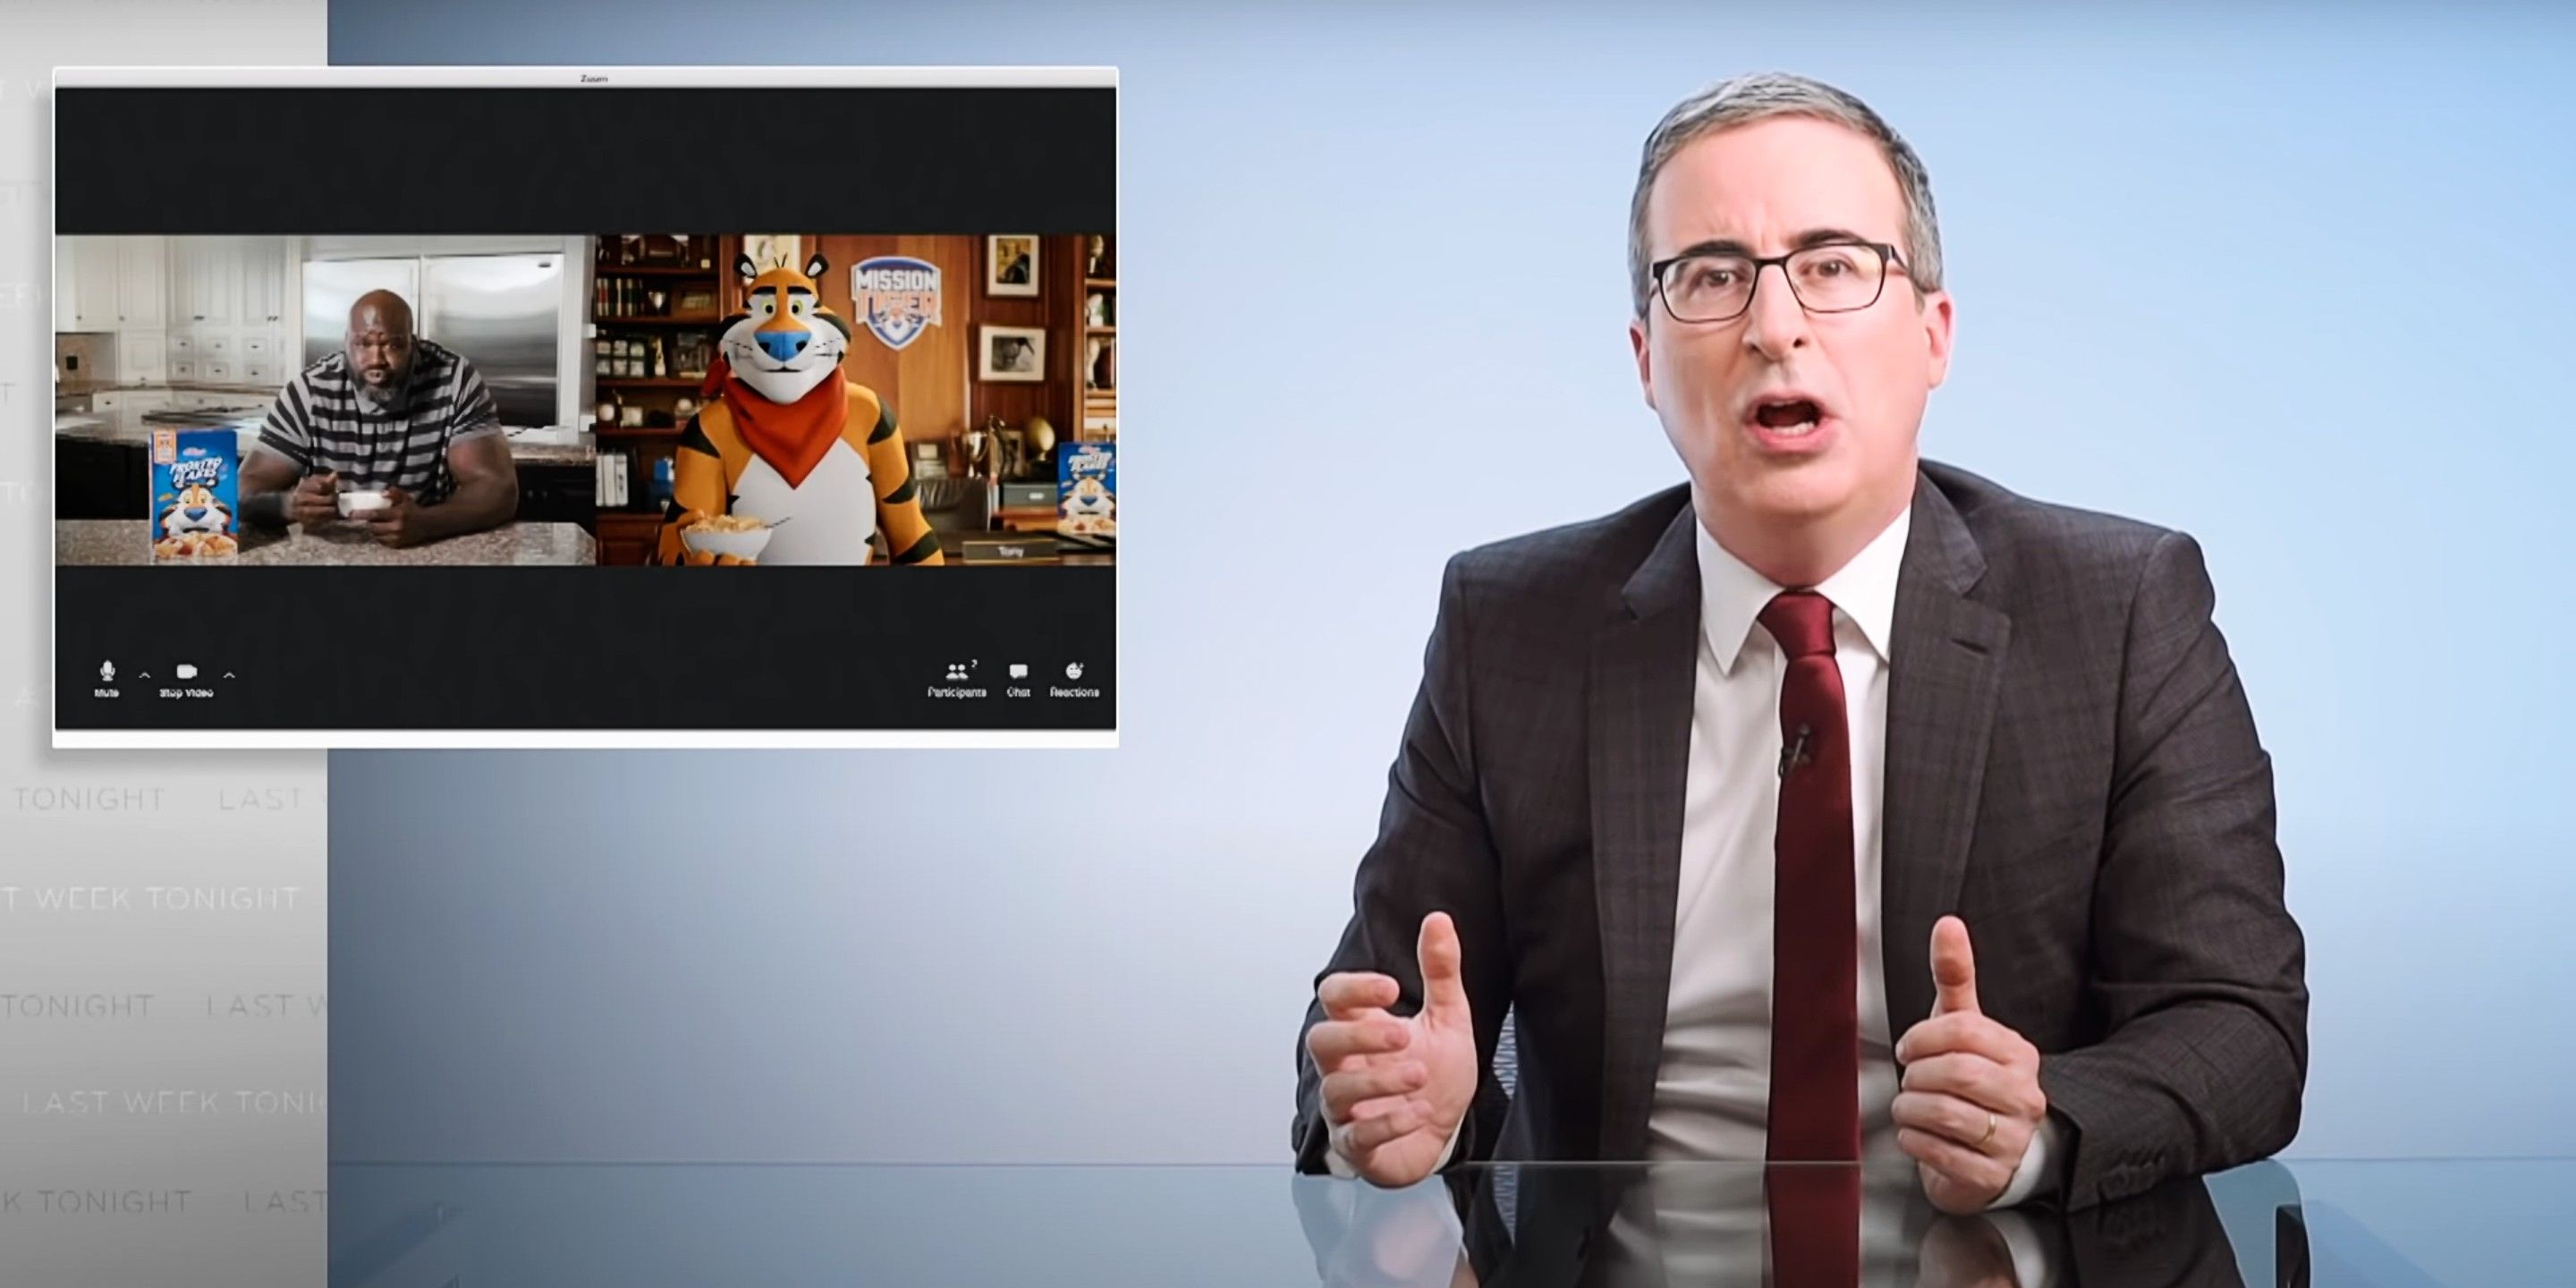 John Oliver Last Week Tonight segment about Shaq's Frosted Flakes commercial and cereal.